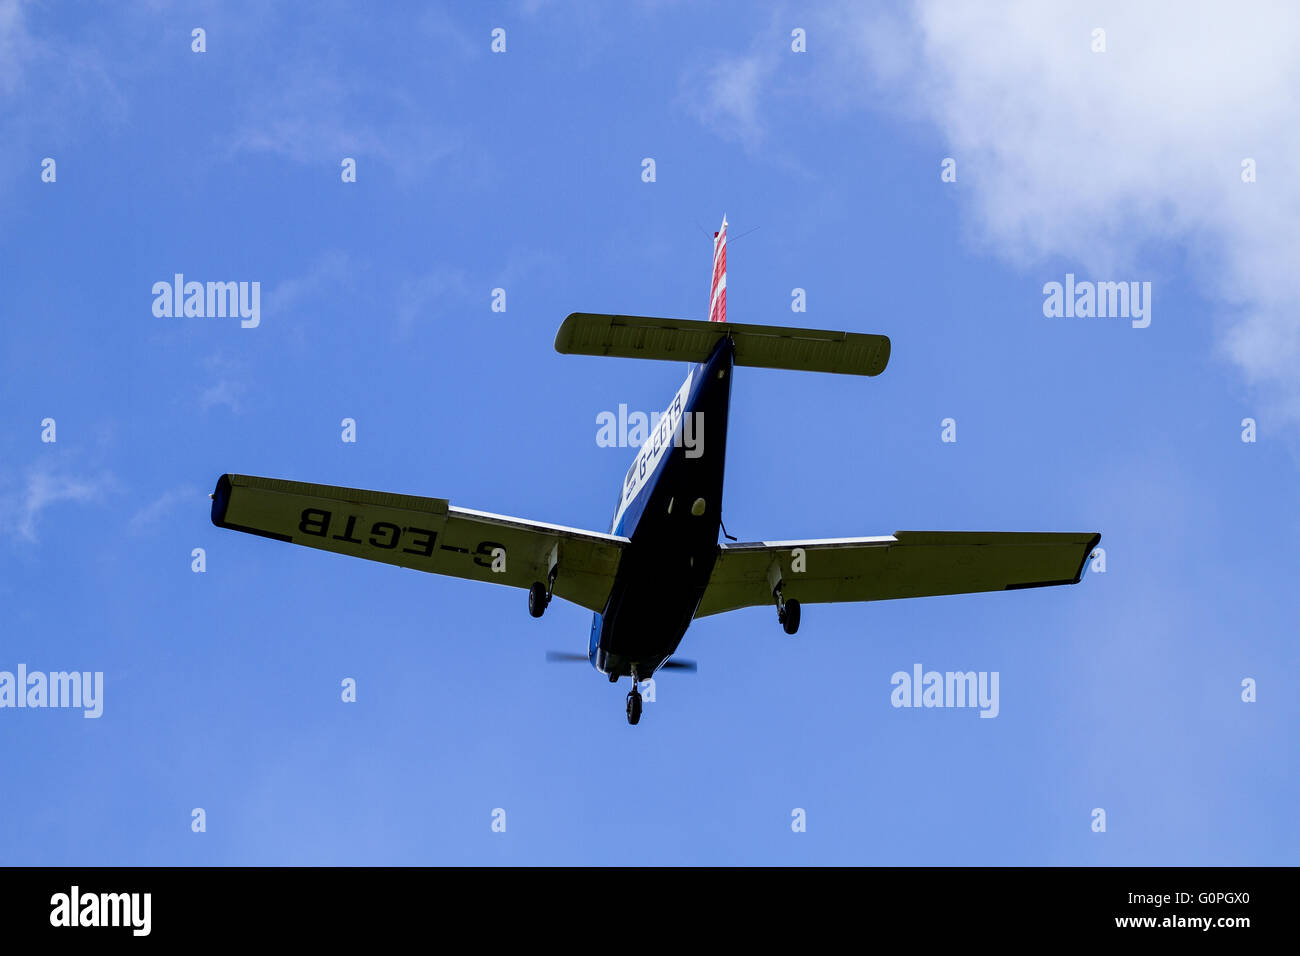 Dundee, Tayside, Scotland, UK, May 3rd 2016. UK Weather: High winds in Dundee. Tayside Aviation pilots landing their aircraft without difficulty in blustery winds gusting up to 30mph at the Dundee Airport. Credit: Dundee Photographics / Alamy Live News Stock Photo